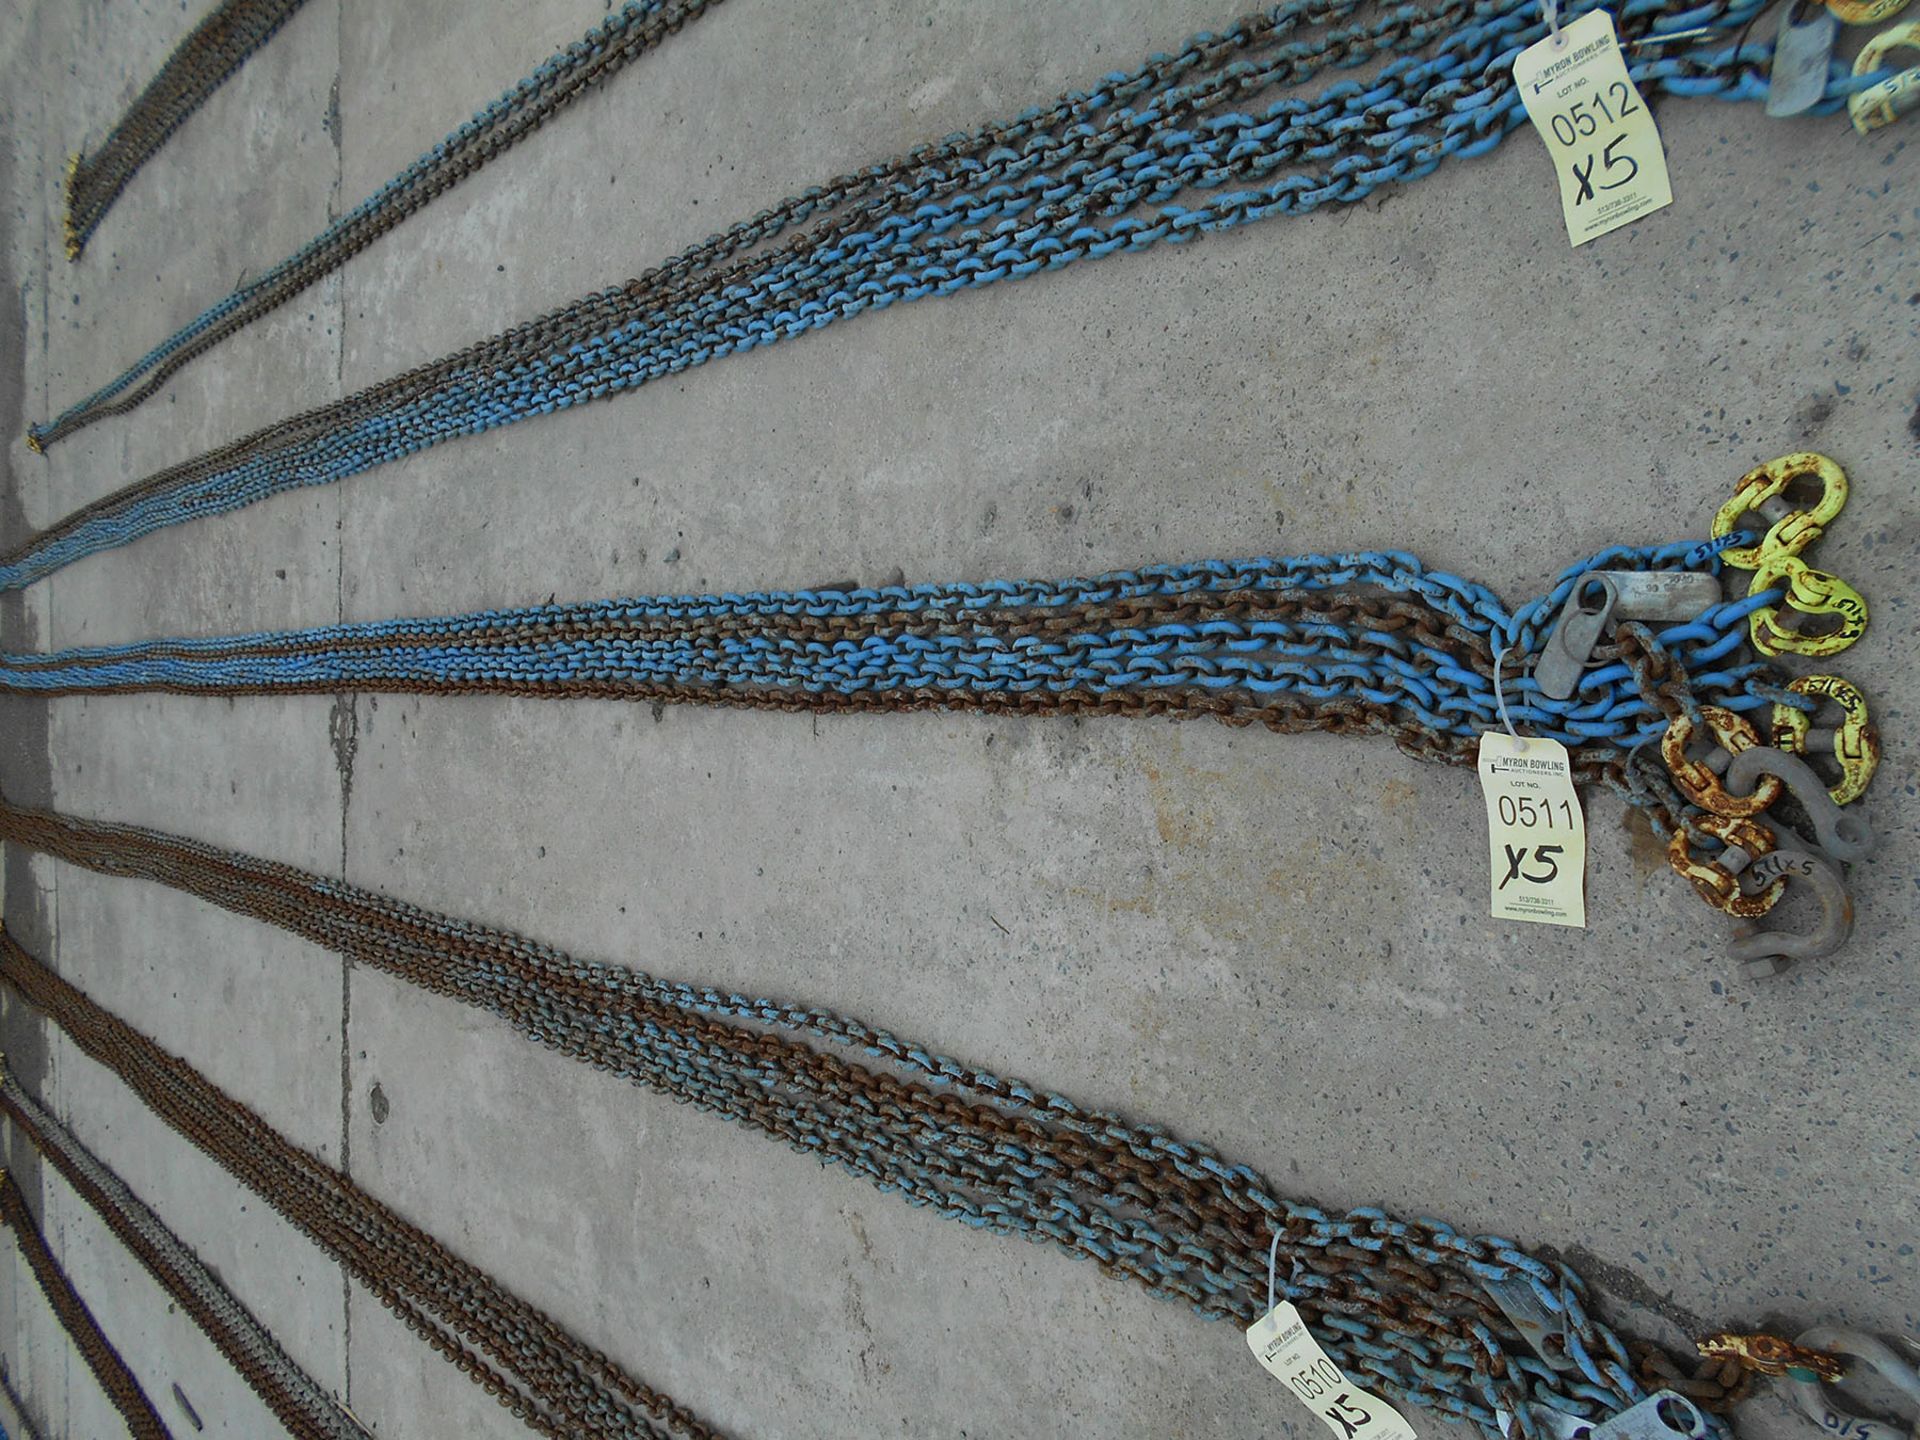 (5) RIGGING CHAINS WITH SHACKLES; REACH 24', SIZE 3/8'', GRADE 10 - Image 2 of 2